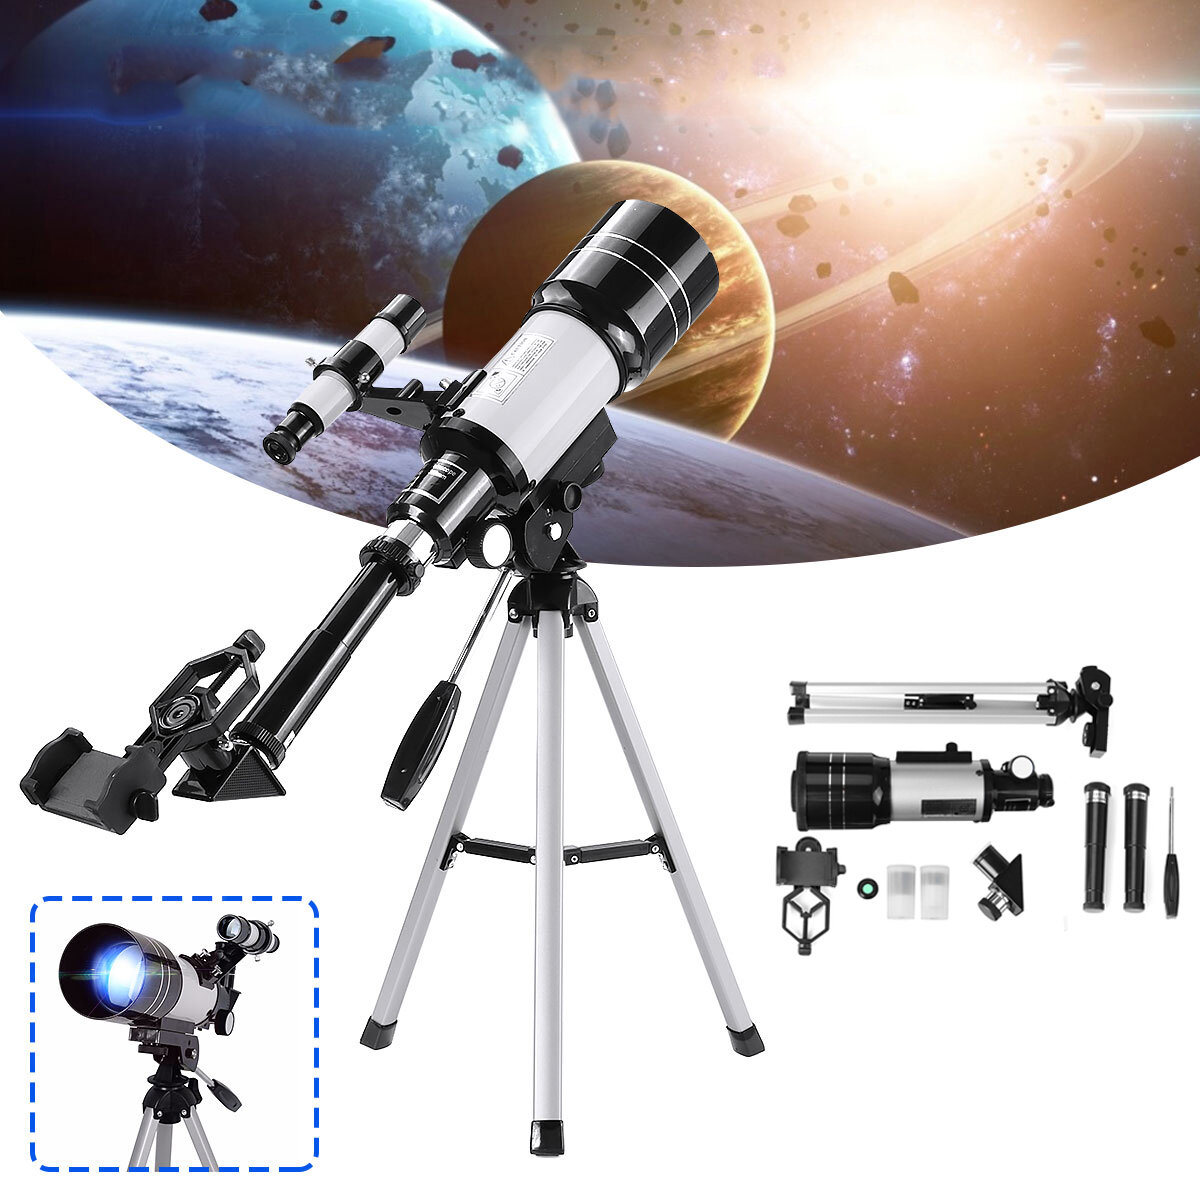 150X Astronomical Telescope 70mm Refractor Clear Image High Magnification Monocular With Tripod Phone Adapter